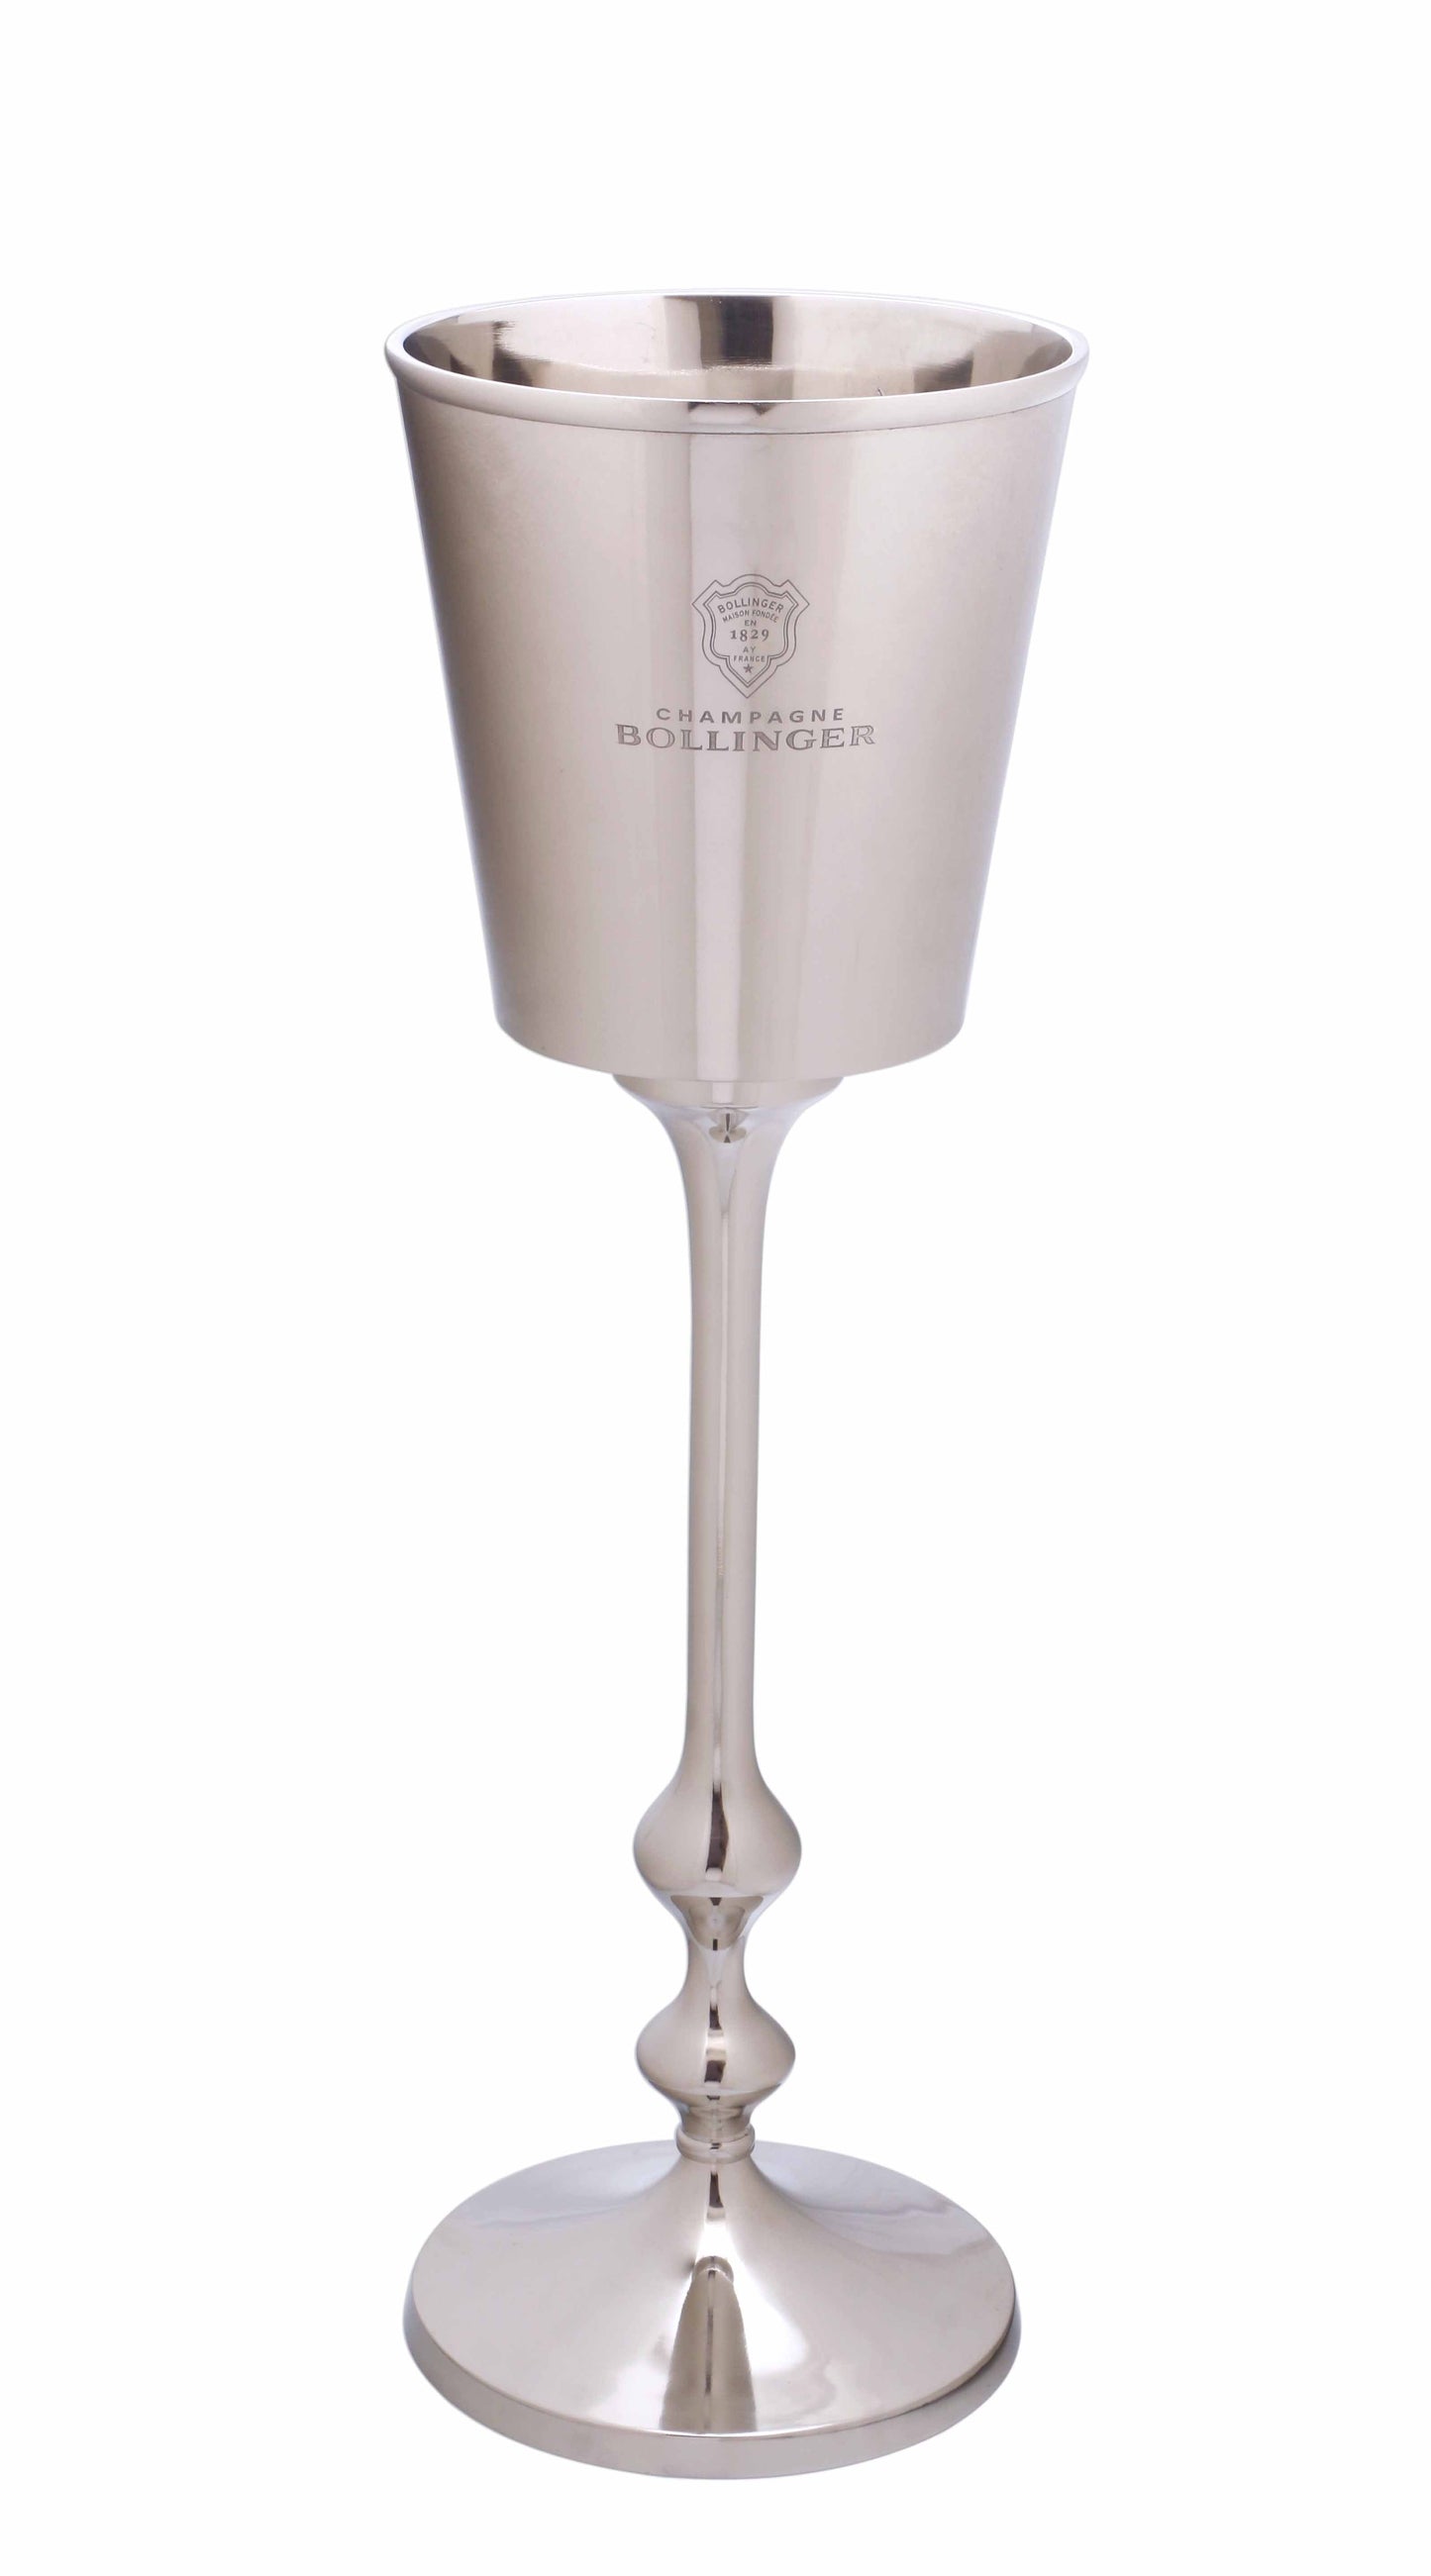 Champagne Standing Bucket - Bollinger for sale - Woodcock and Cavendish